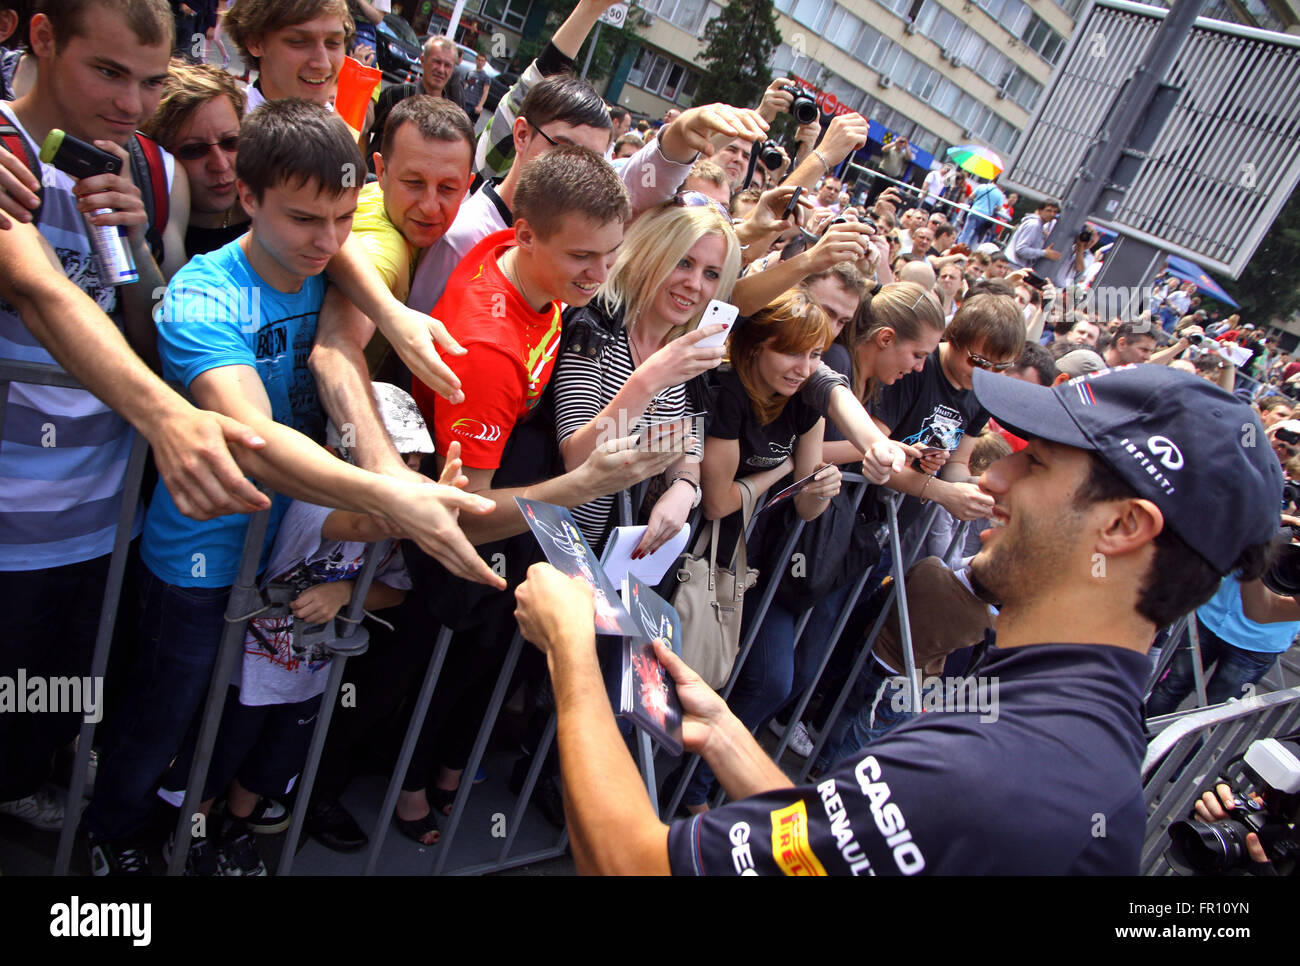 KYIV, UKRAINE - MAY 19, 2012: Formula 1 driver Daniel Ricciardo of Red Bull Racing Team signs autographs during Red Bull Champions Parade on the streets of Kyiv city Stock Photo